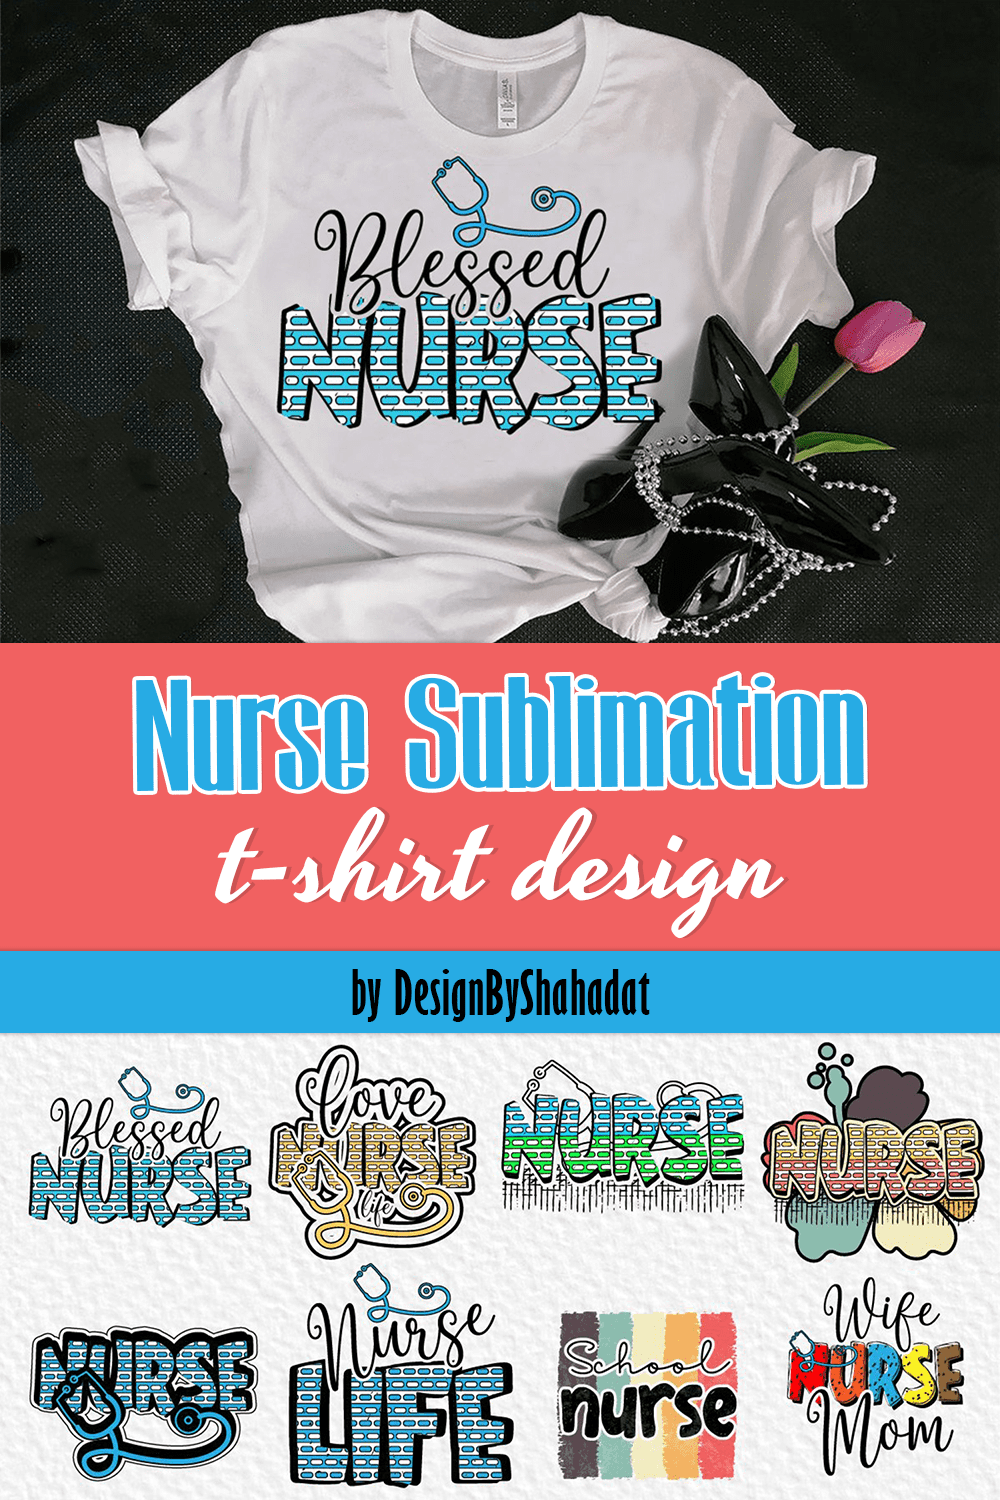 White T-shirt with lovely nurse print.